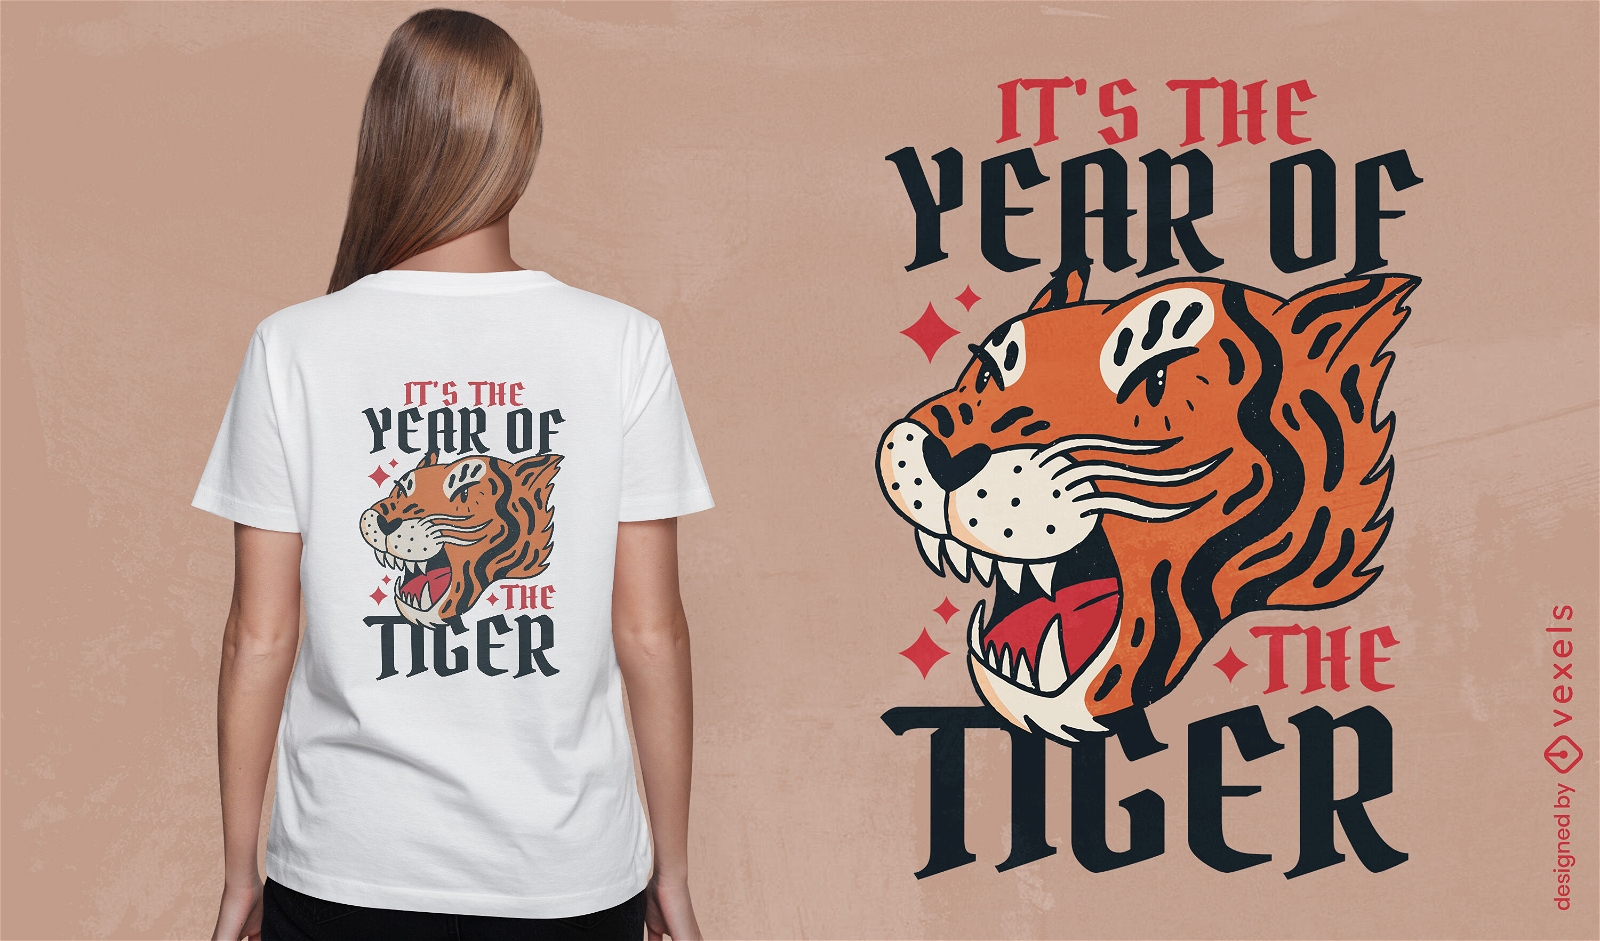 2022 Year of the Tiger t-shirt design